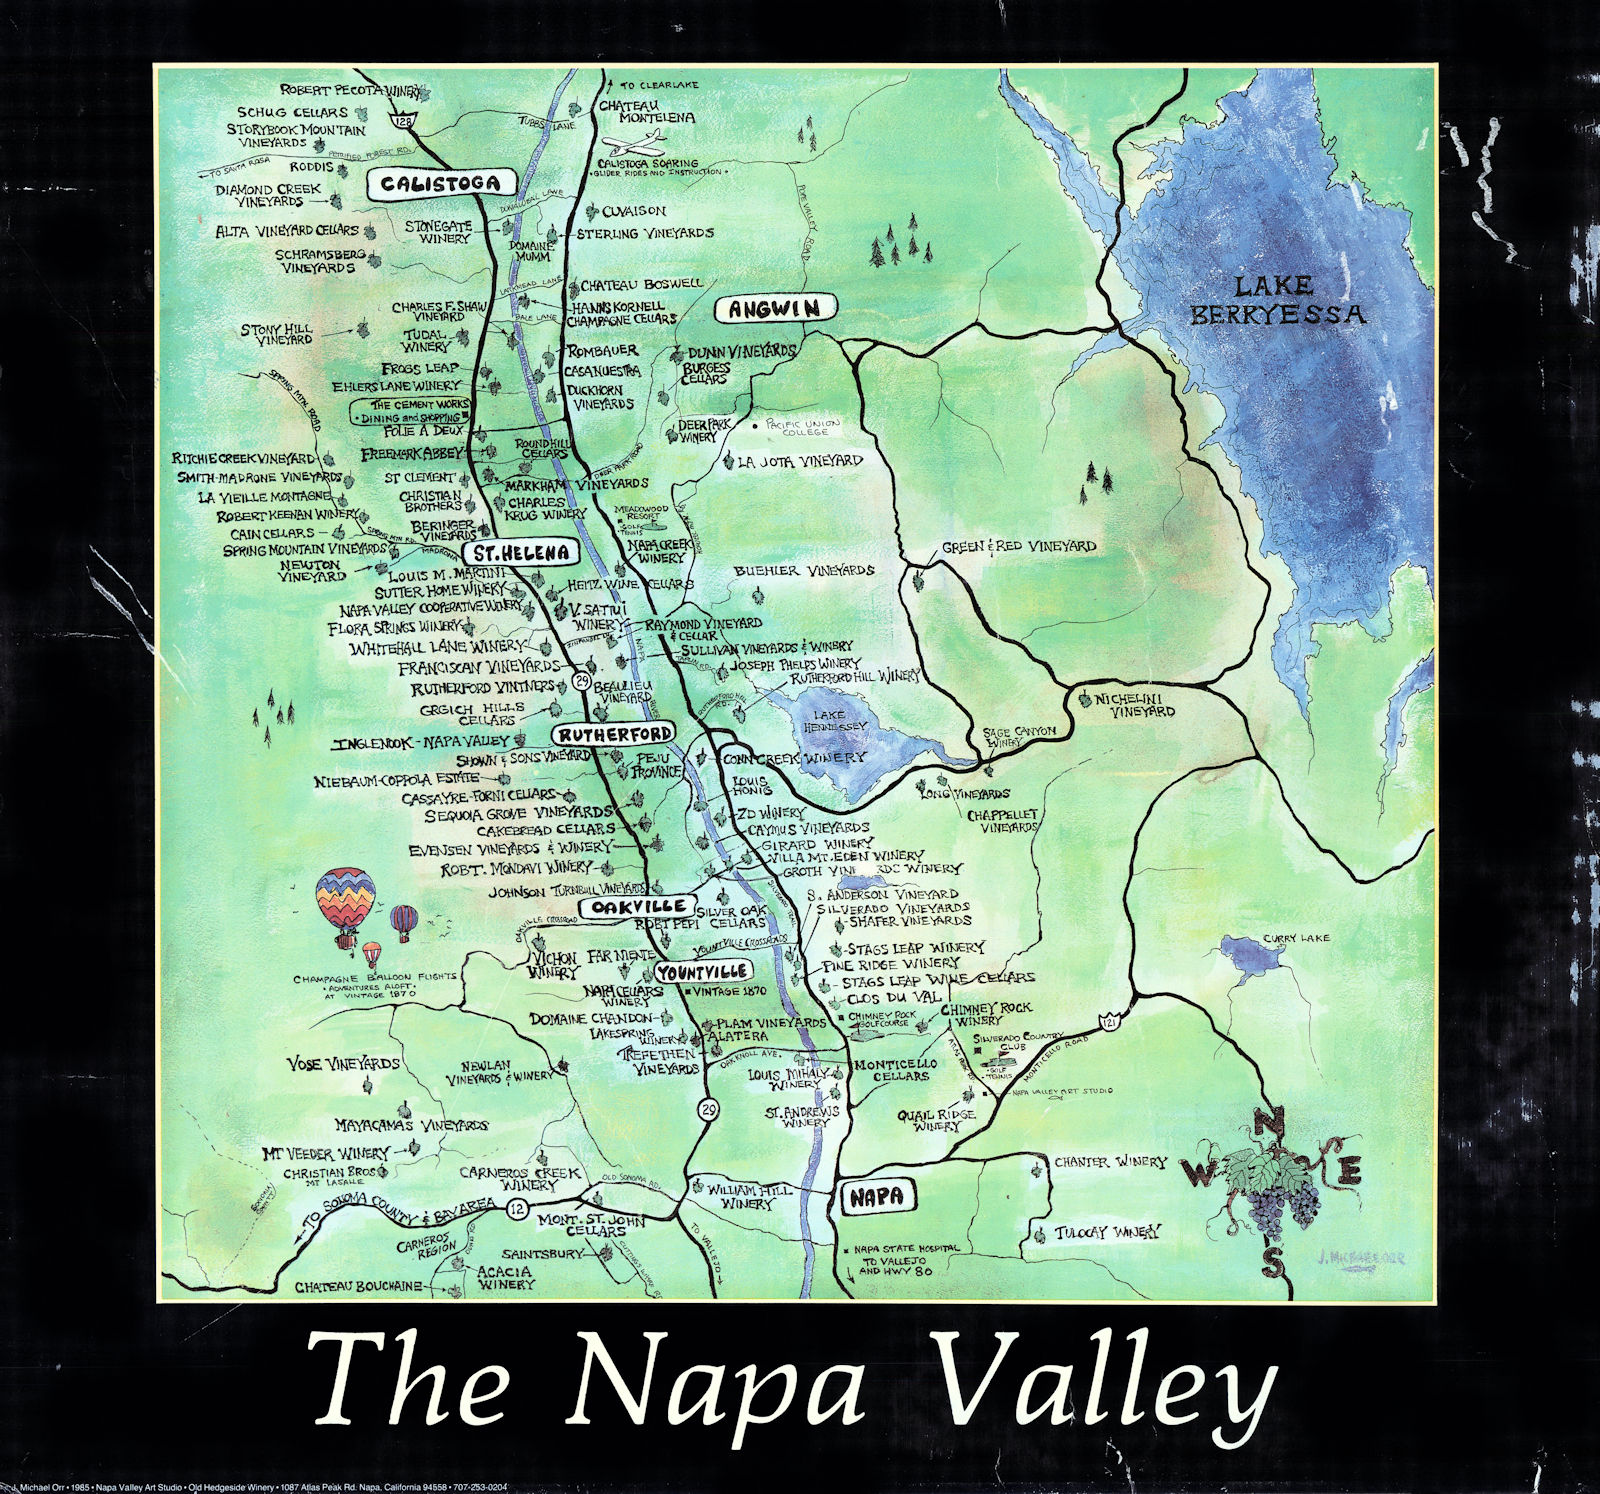 Associate Product The Napa Valley, California. Wineries & wine region map by J. Michael Orr 1985